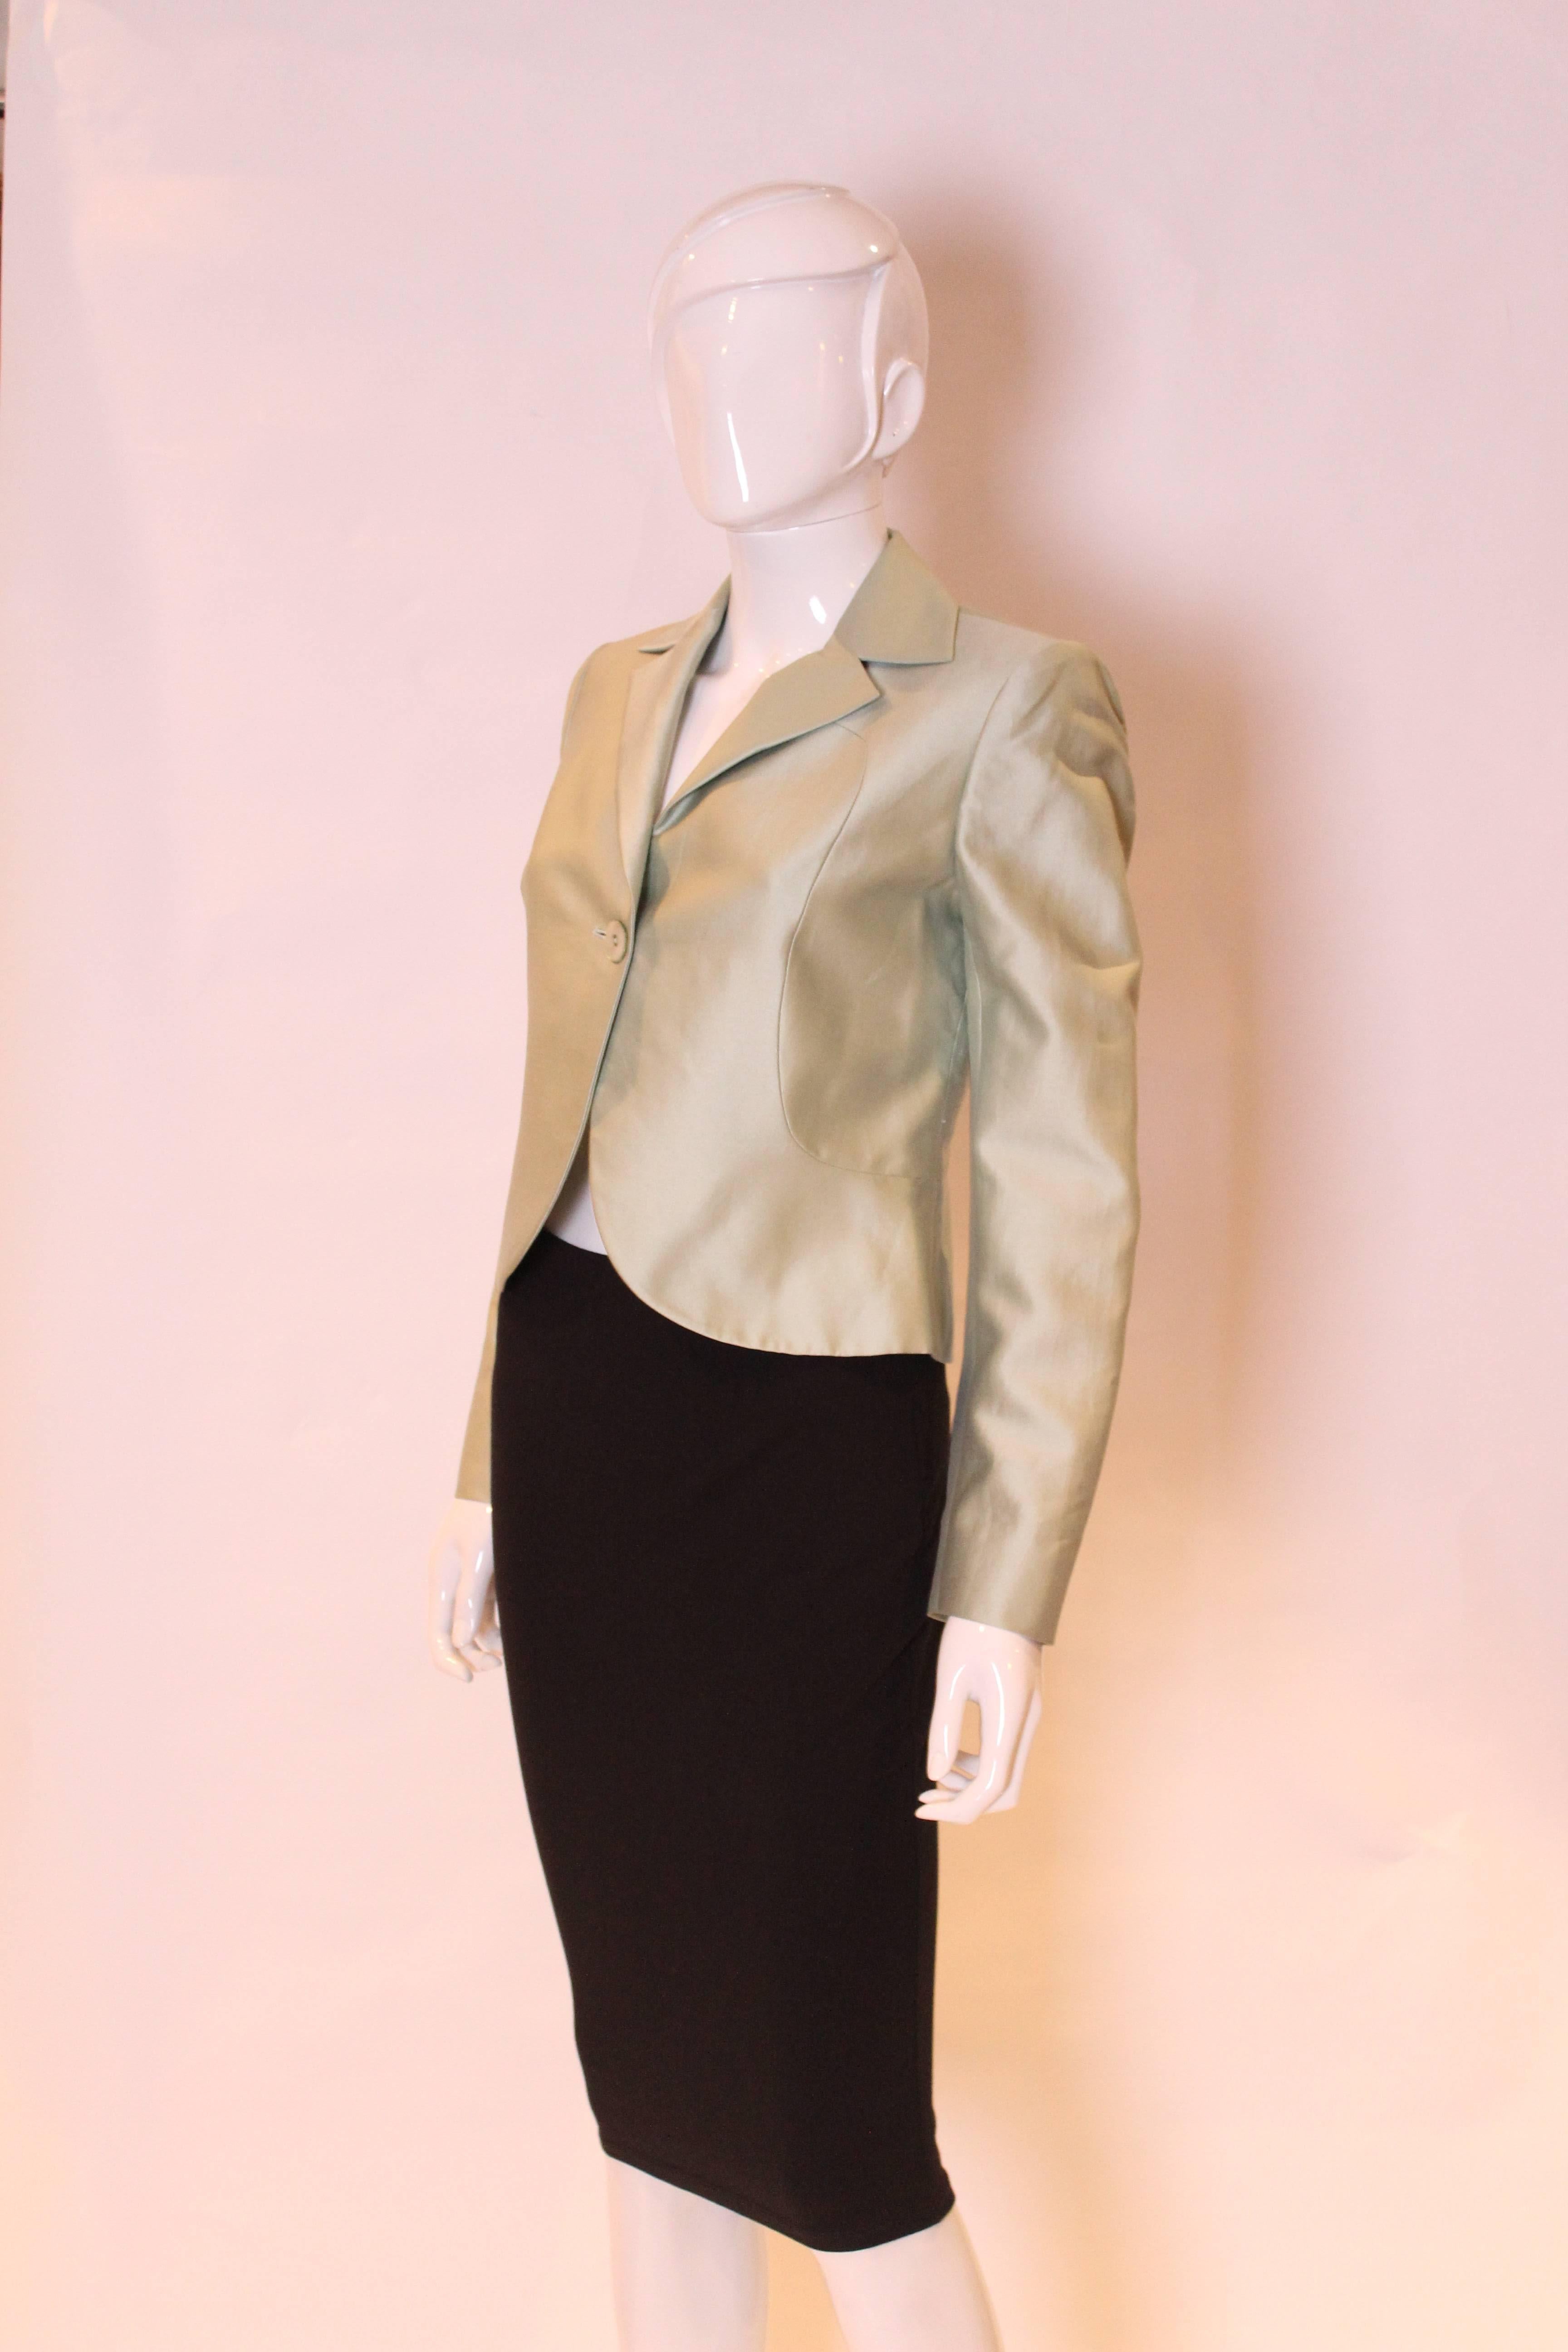 jules and leopold green blazer